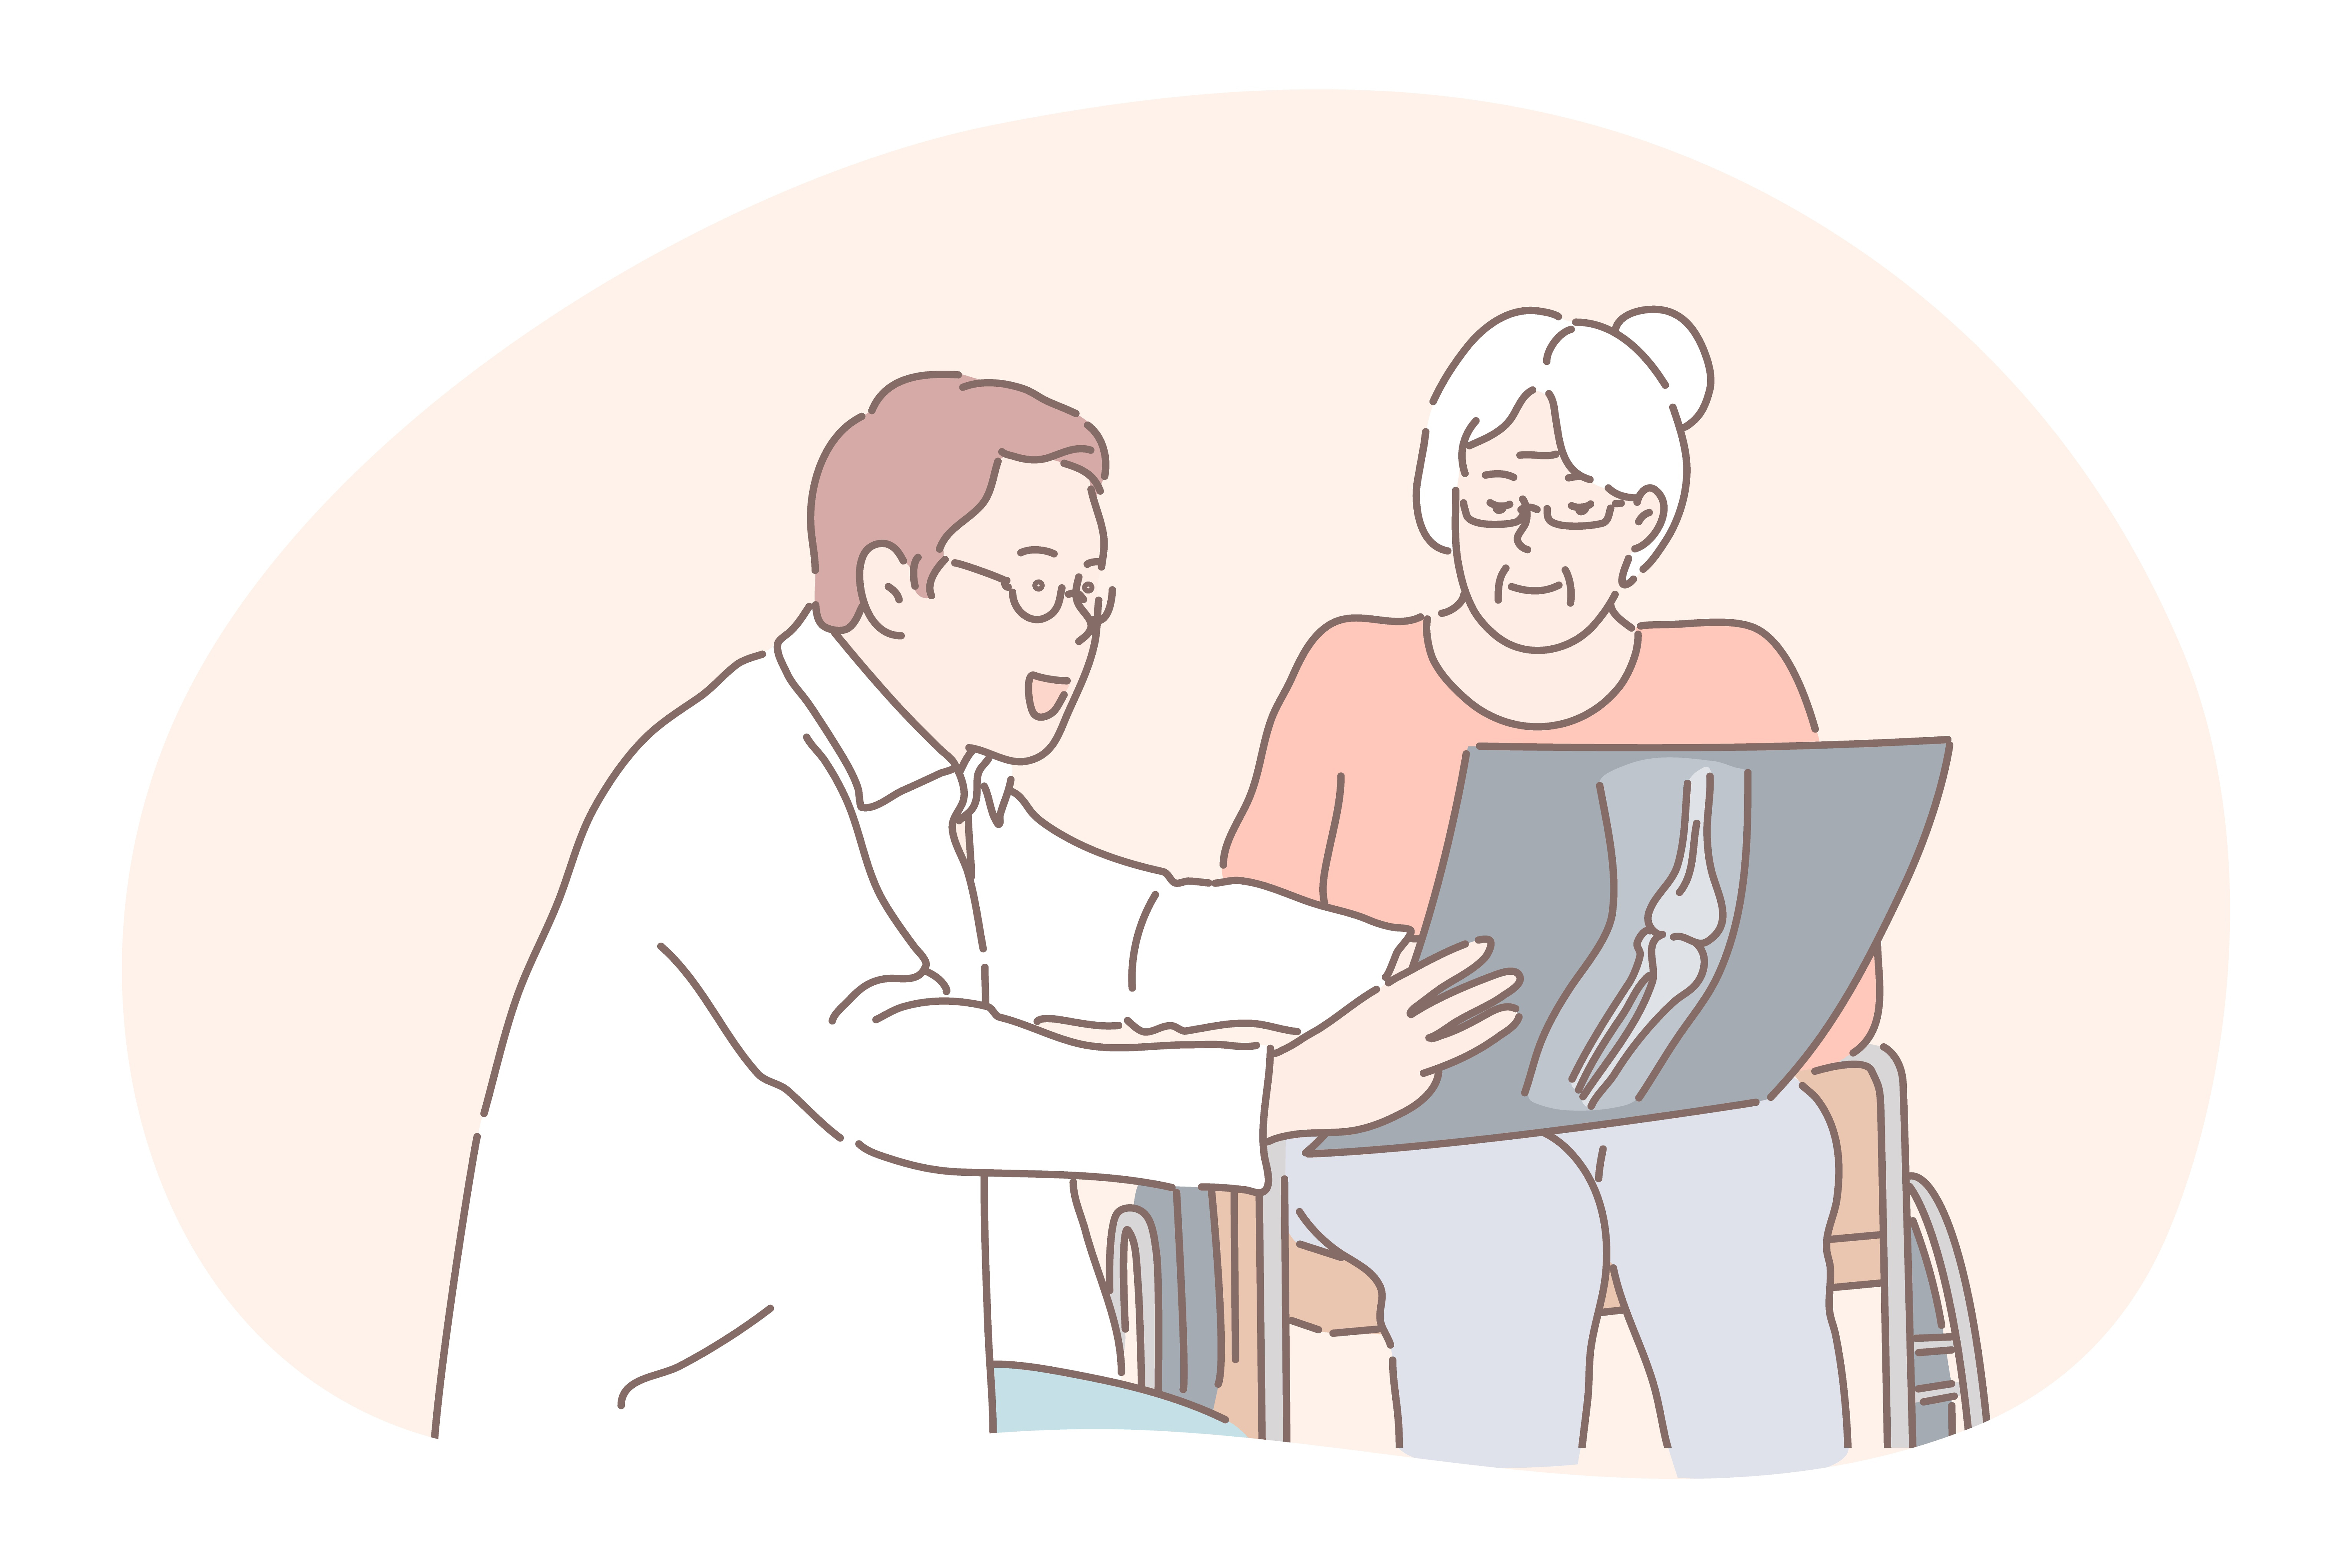 Communication between doctor and patient, medicare, injury, arthritis concept. Positive man doctor cartoon characters showing senior woman patient in wheelchair x-ray of her injured joint during visit. Communication between doctor and patient, medicare, injury, arthritis concept